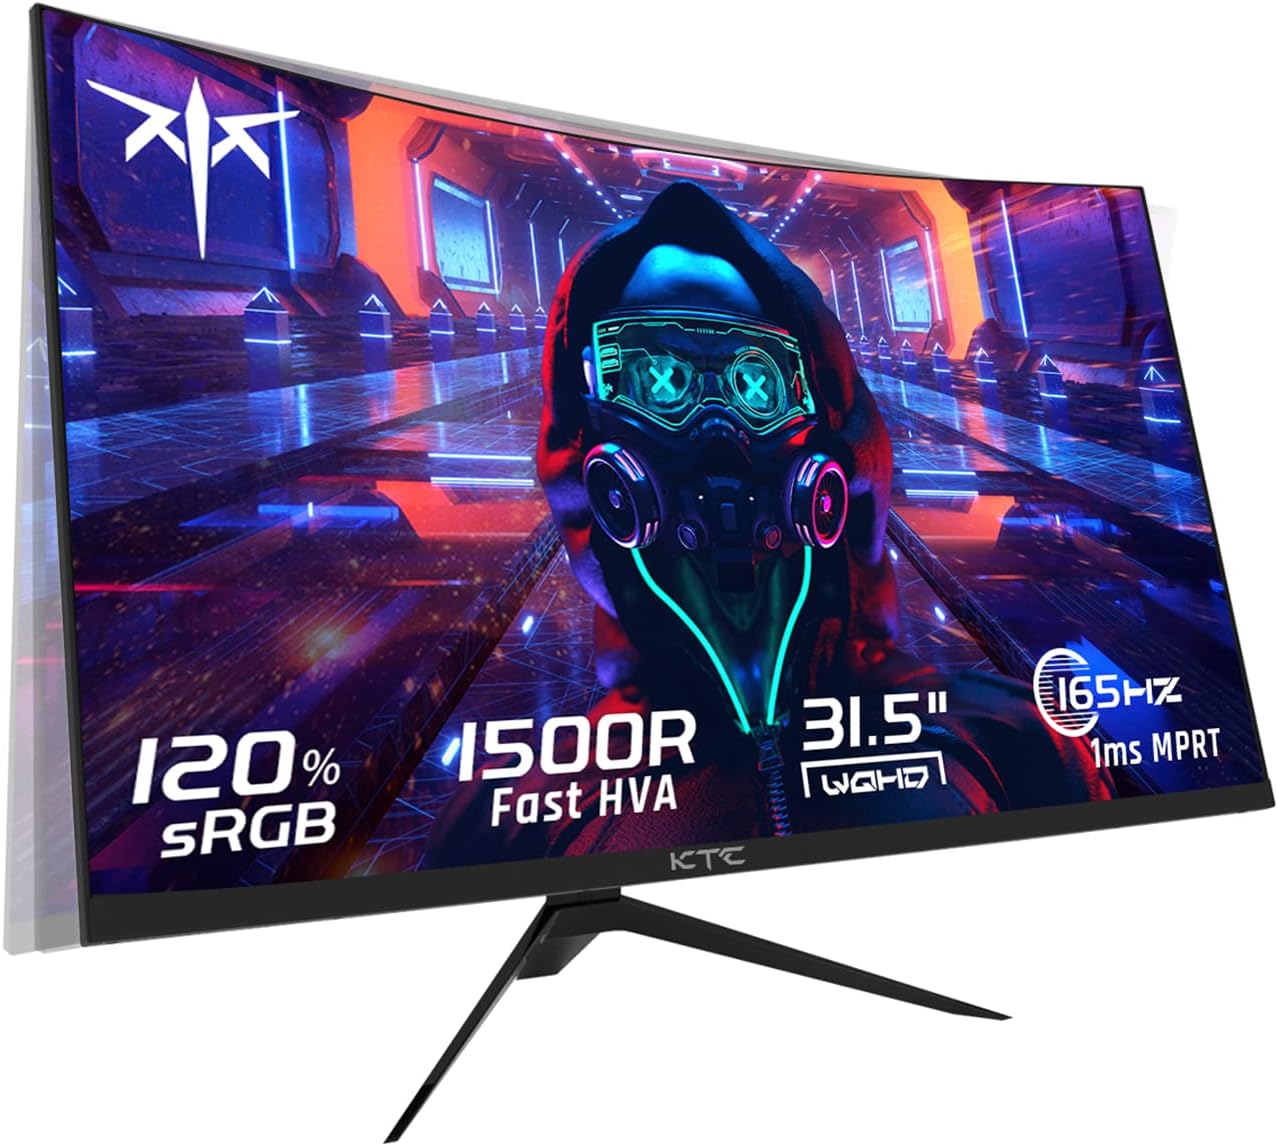 KTC 32 inch Curved Gaming Monitor, 2K 165Hz Monitor, [...]